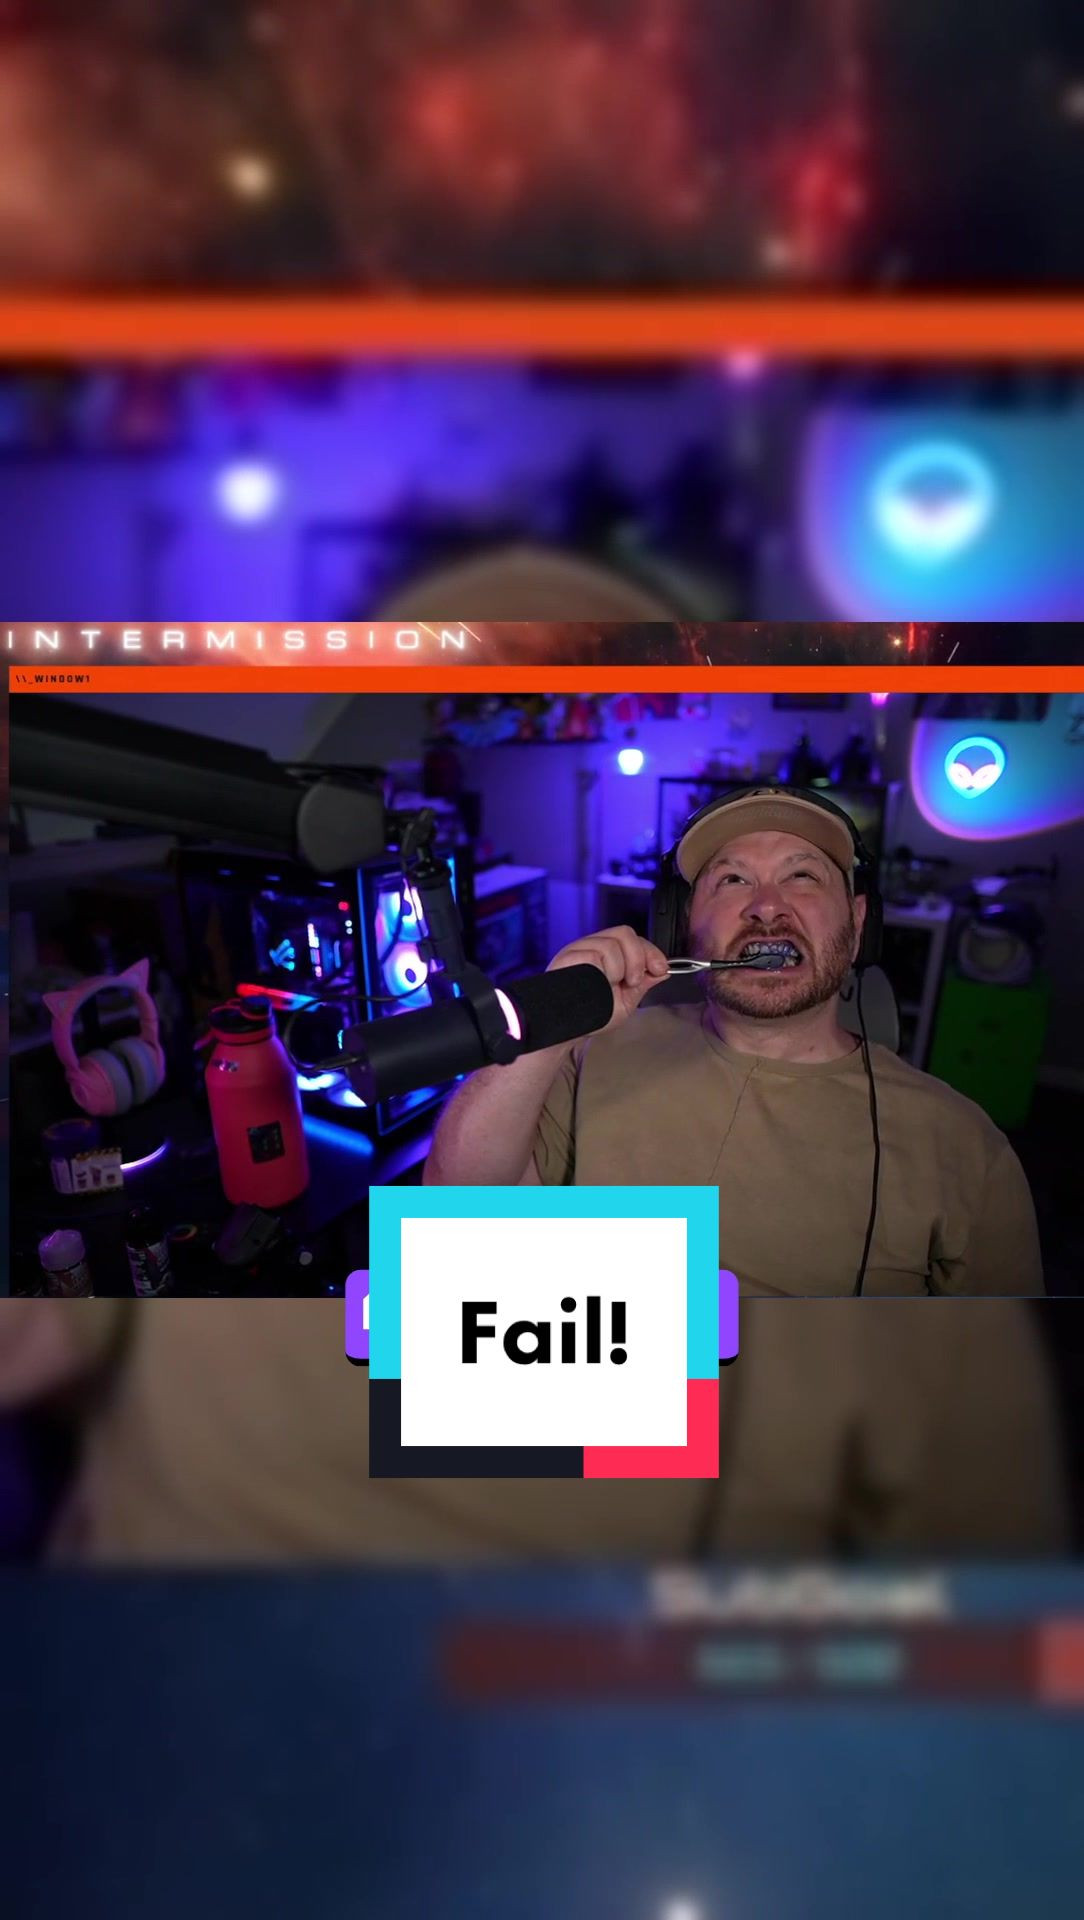 Trying the Hismile tooth whitening on stream…. I couldn’t tell a difference 😂  #hismile #tiktokmademebuyit #fail #wouldntreccomend #twitch #twitchstream 